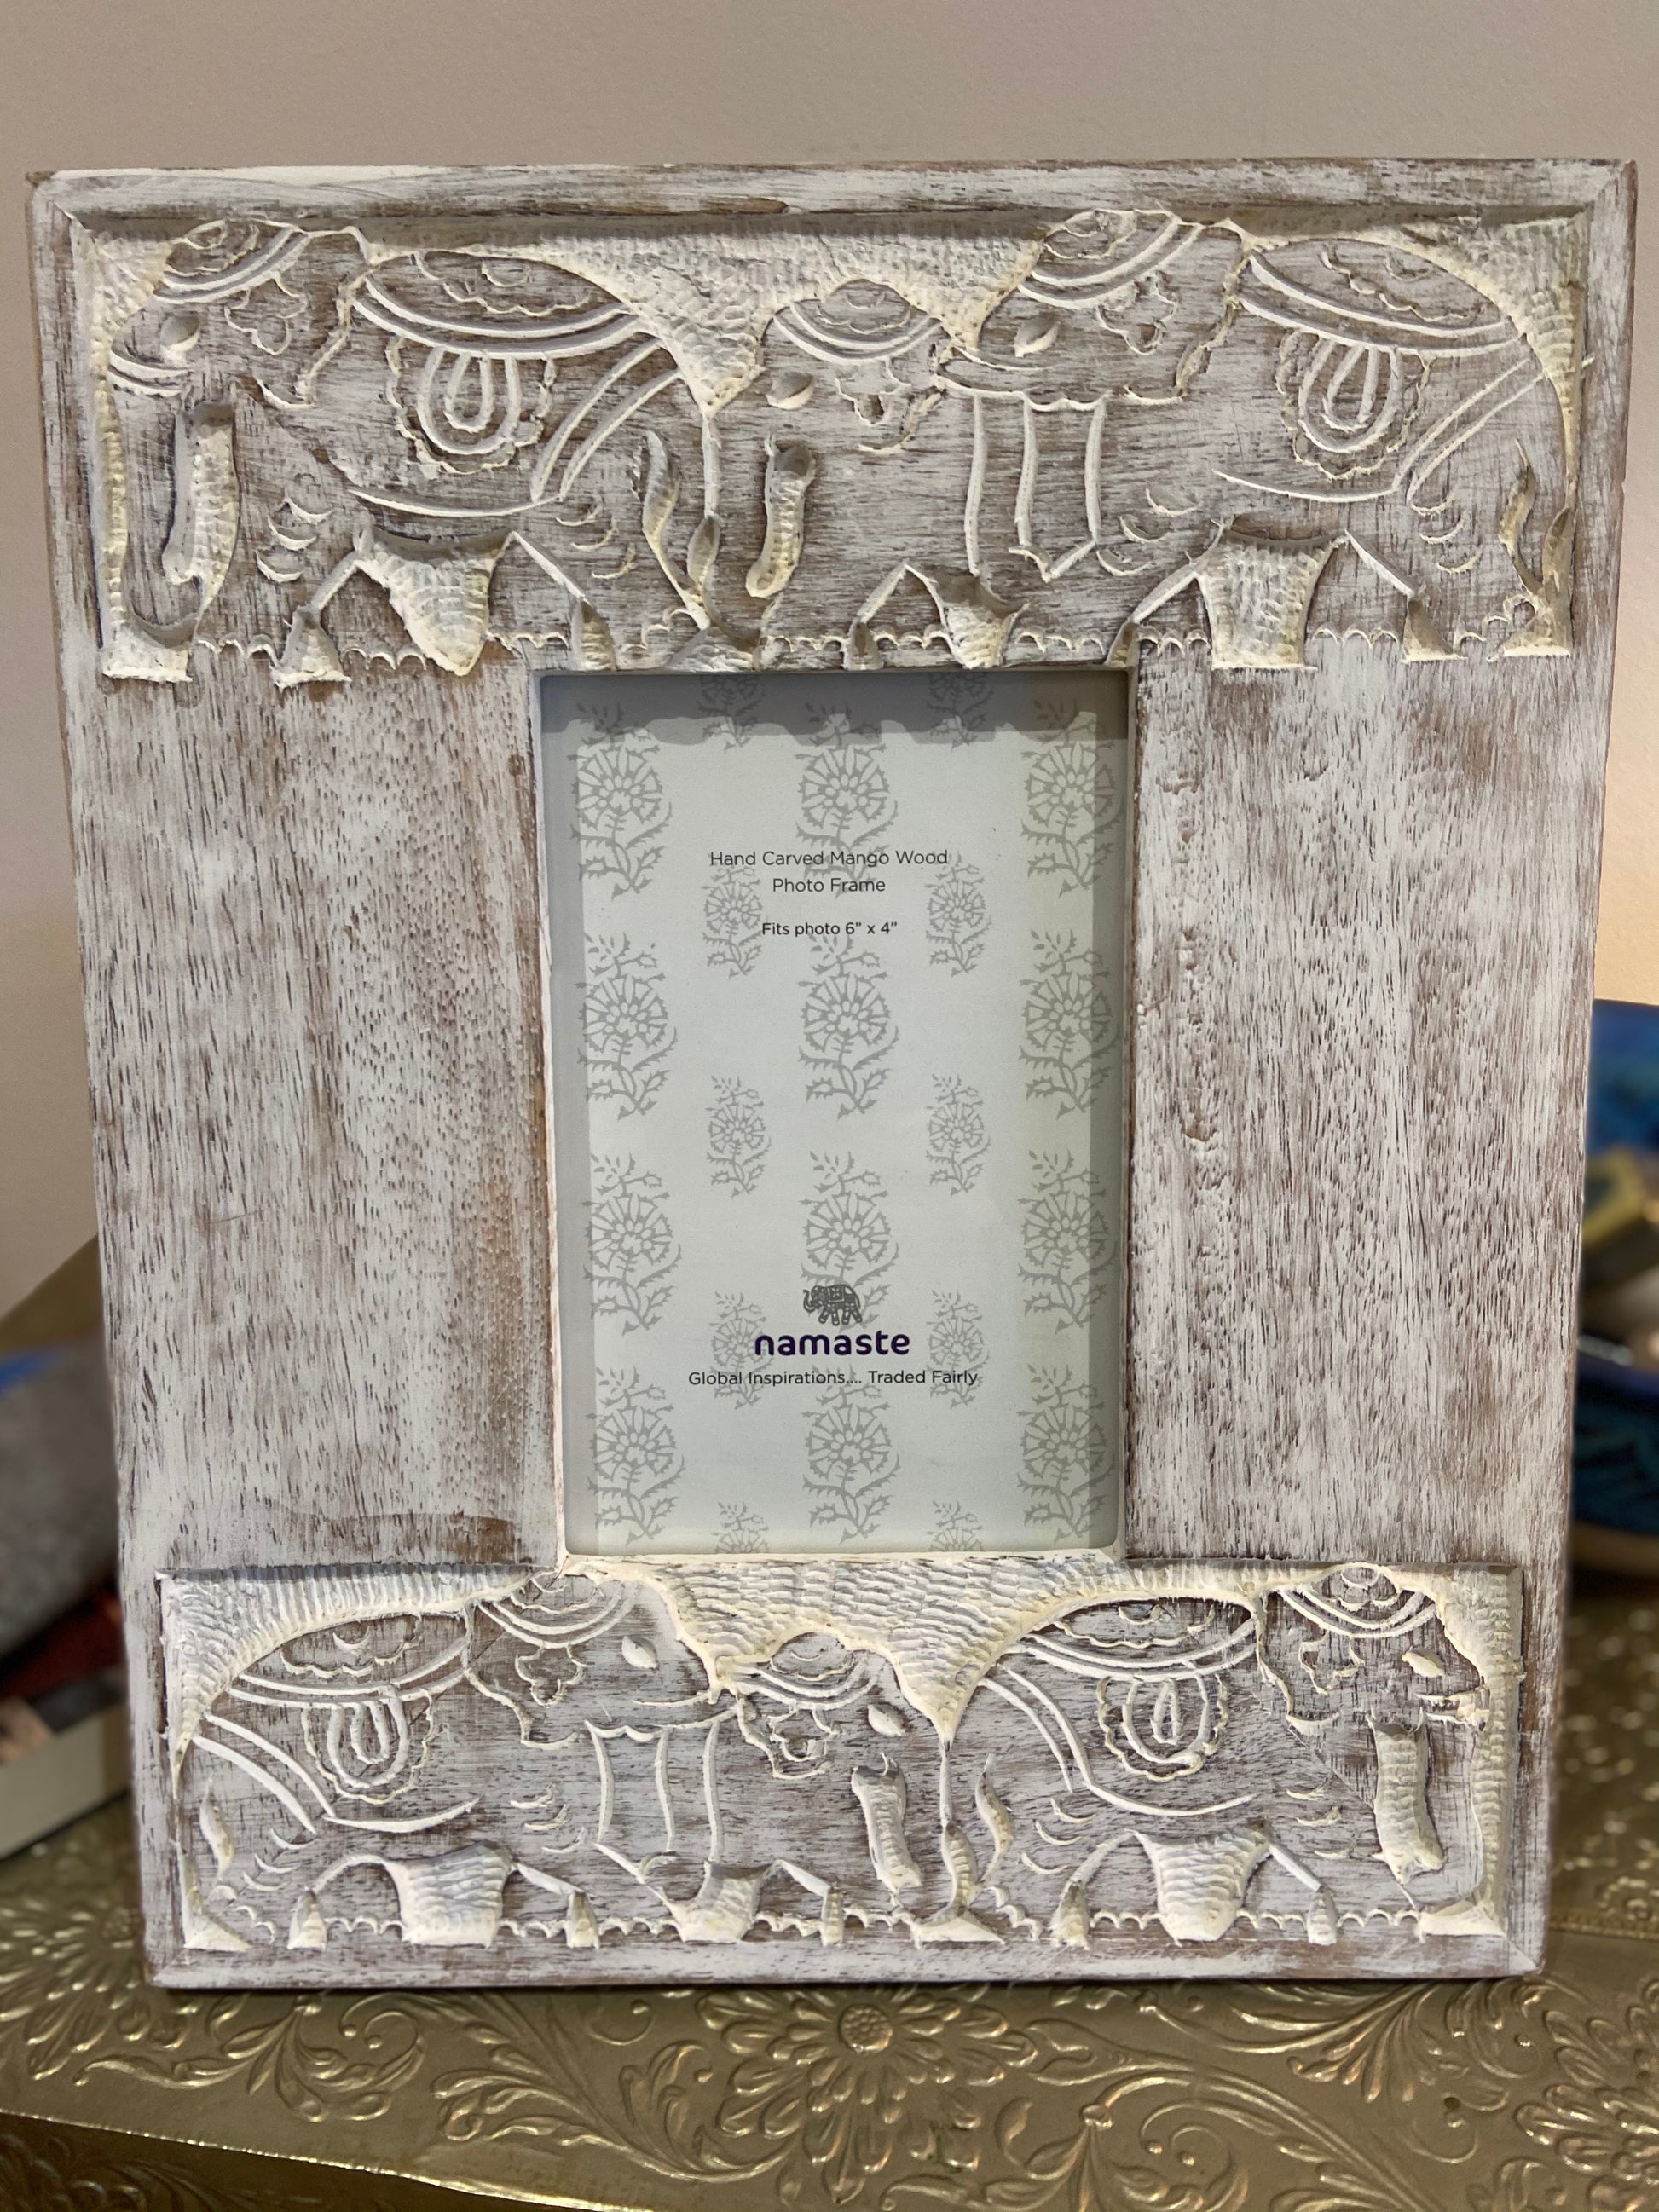 Photo frame made from Mango wood in India. Gentle white washed and beautiful carved elephant design. Size - 28 x 23cm, decorative photo frame, white photo frame, white photo frame with elephants on, photo frame for the home, white washed frame for photos, Mango wood phot frame, medium size photo frame